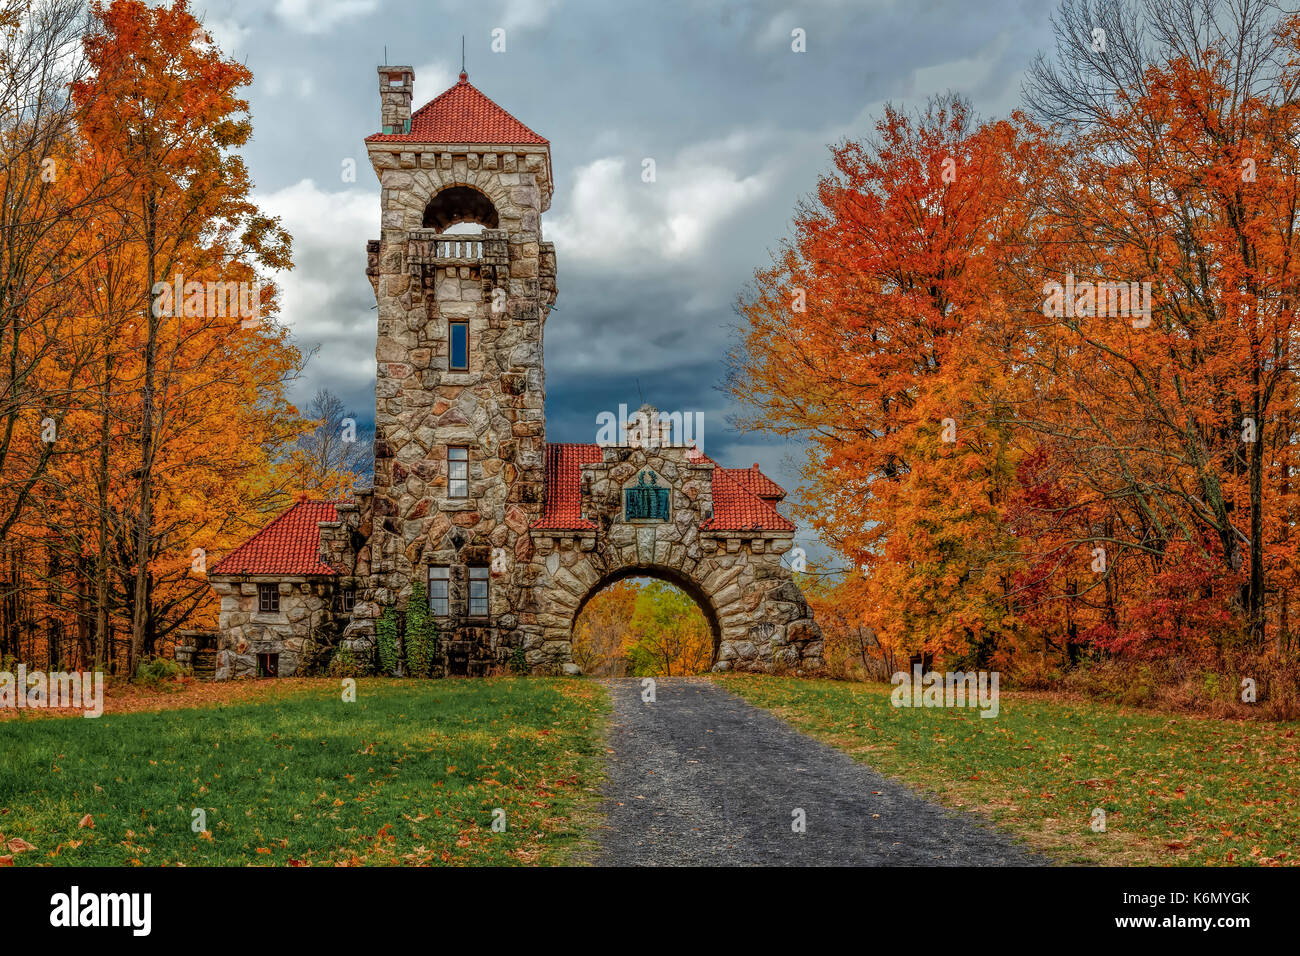 Mohonk Preserve Gatehouse - Surrounded by the warm and bright colors of fall foliage which make this area of New Paltz, New York a popular travel dest Stock Photo